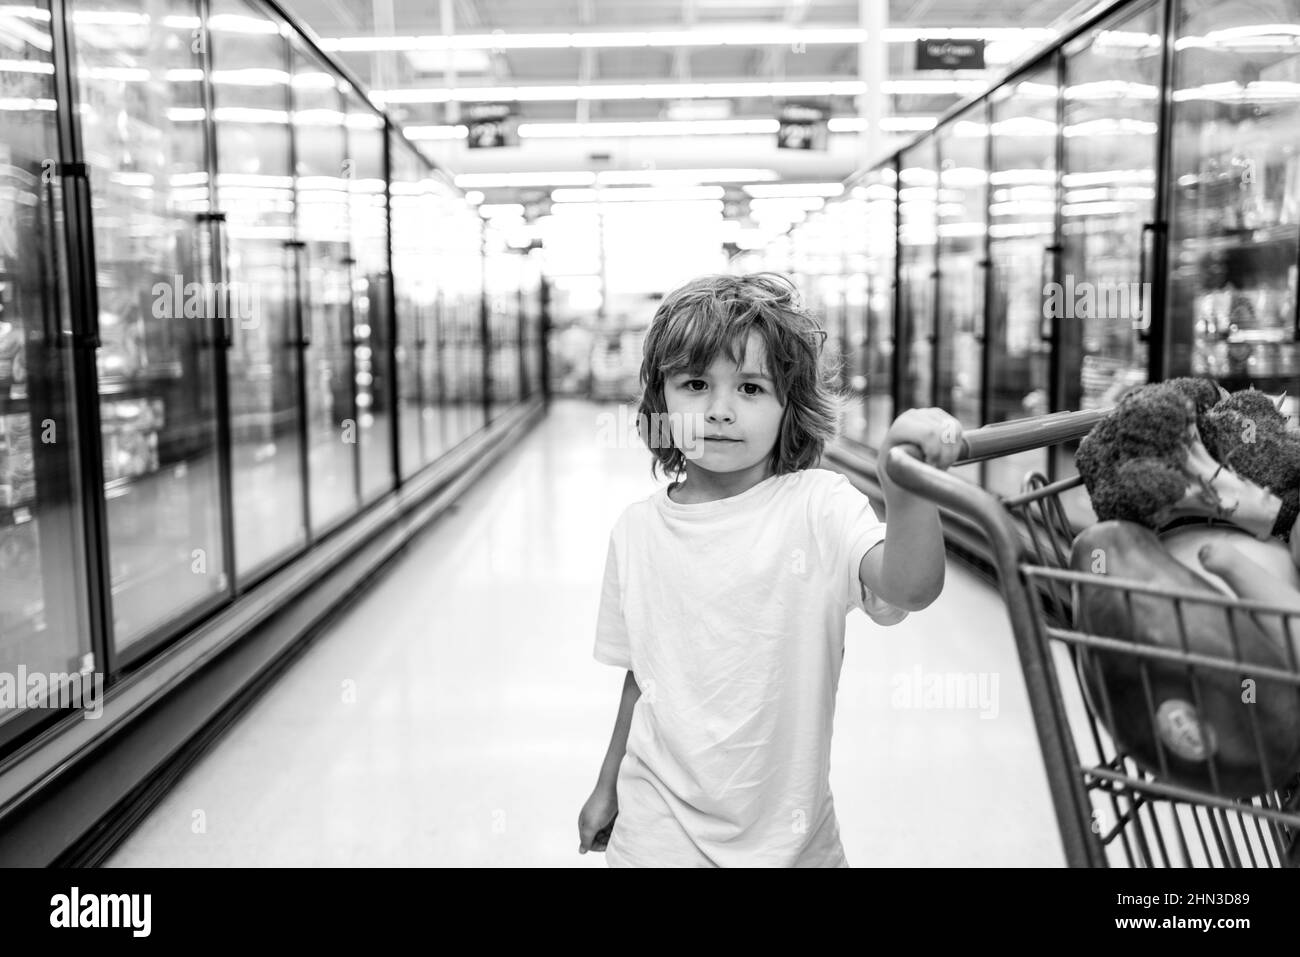 American kid with shopping trolley with in grocery store. A boy is shopping in a supermarket. Stock Photo